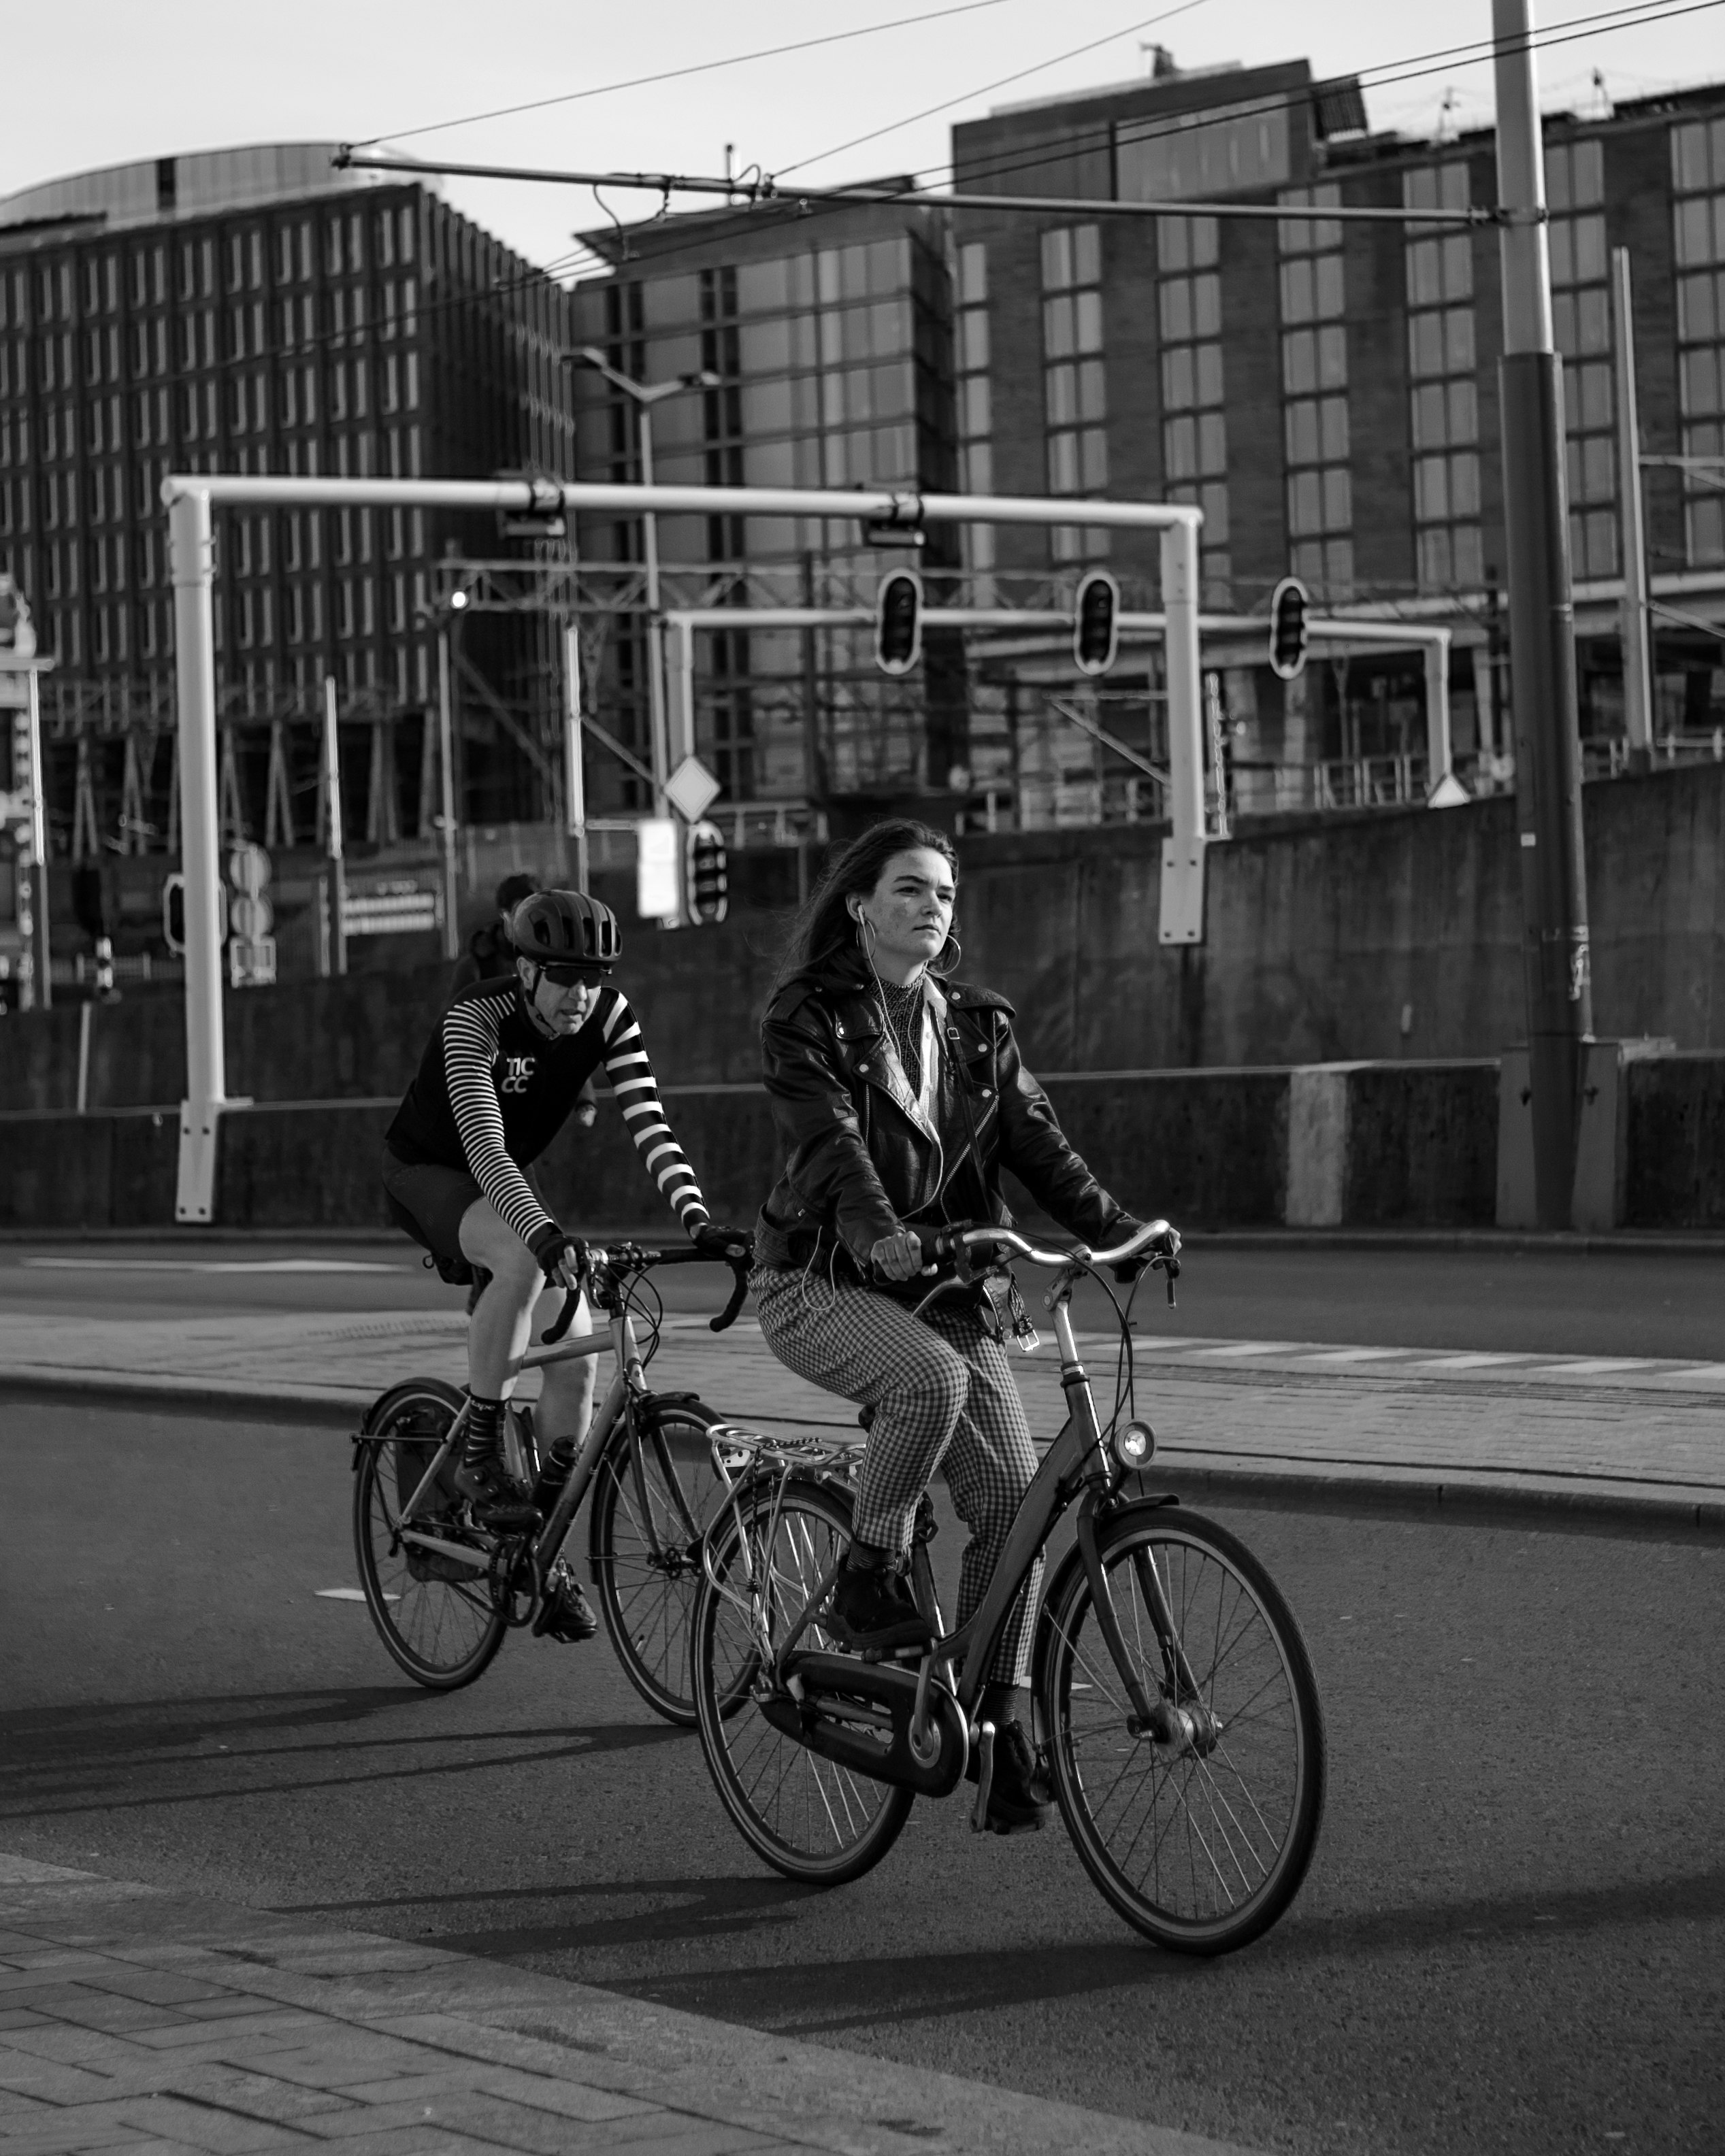 grayscale photo of 2 women riding on bicycle